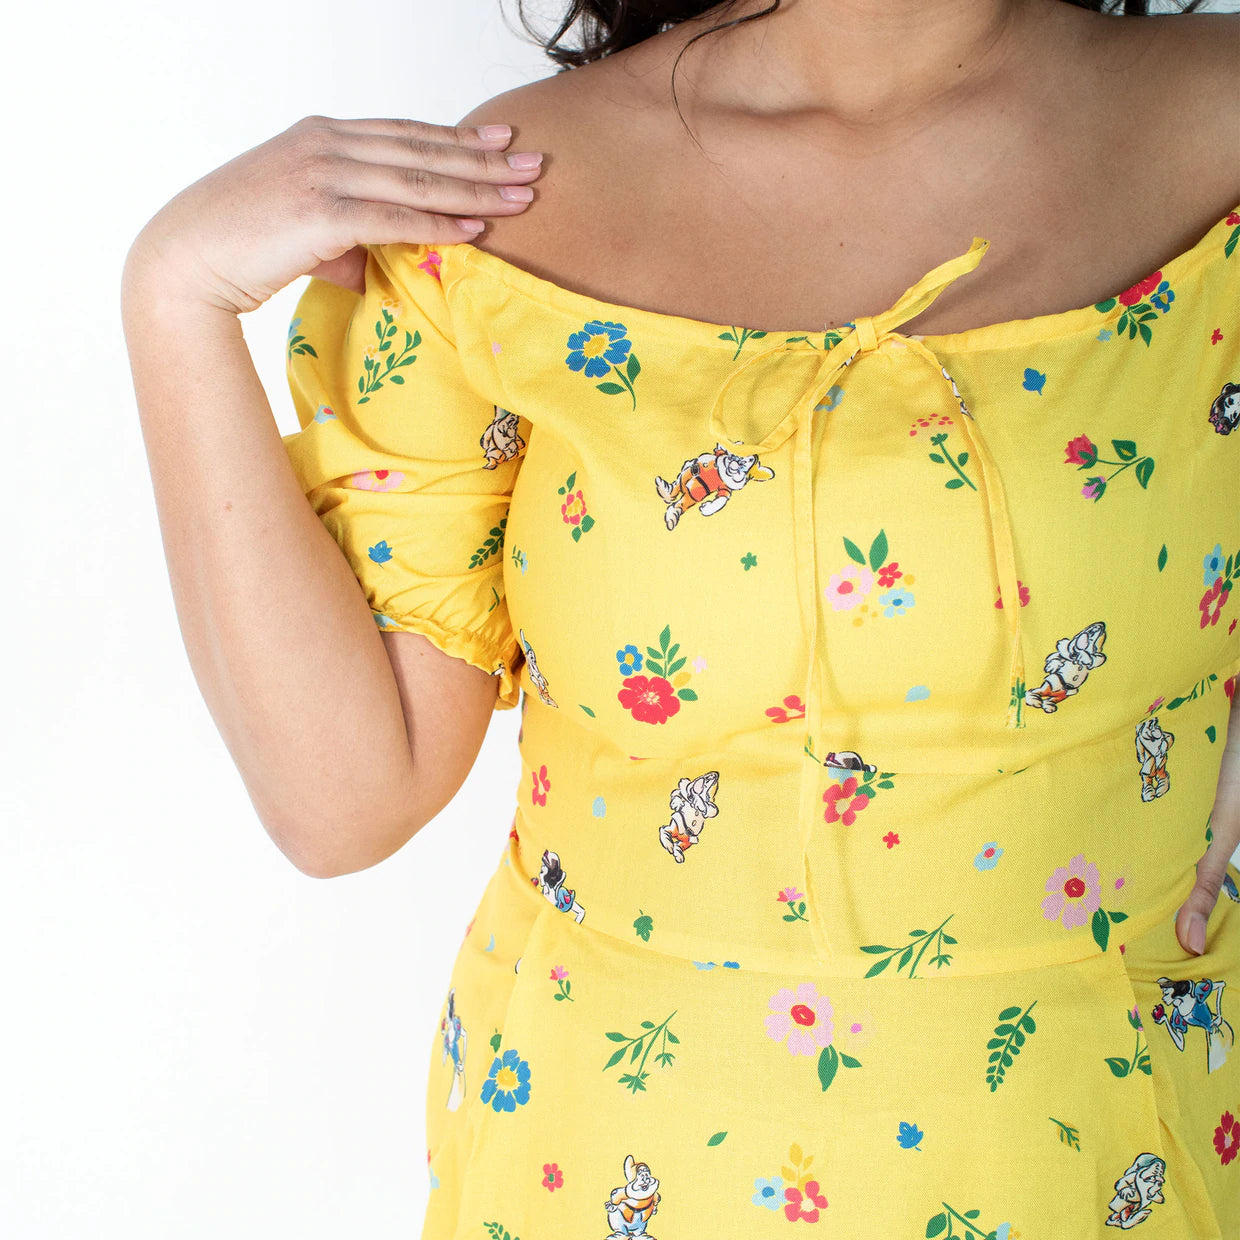 Snow White (Disney) Puffy Sleeve Button-Up Dress by Cakeworthy